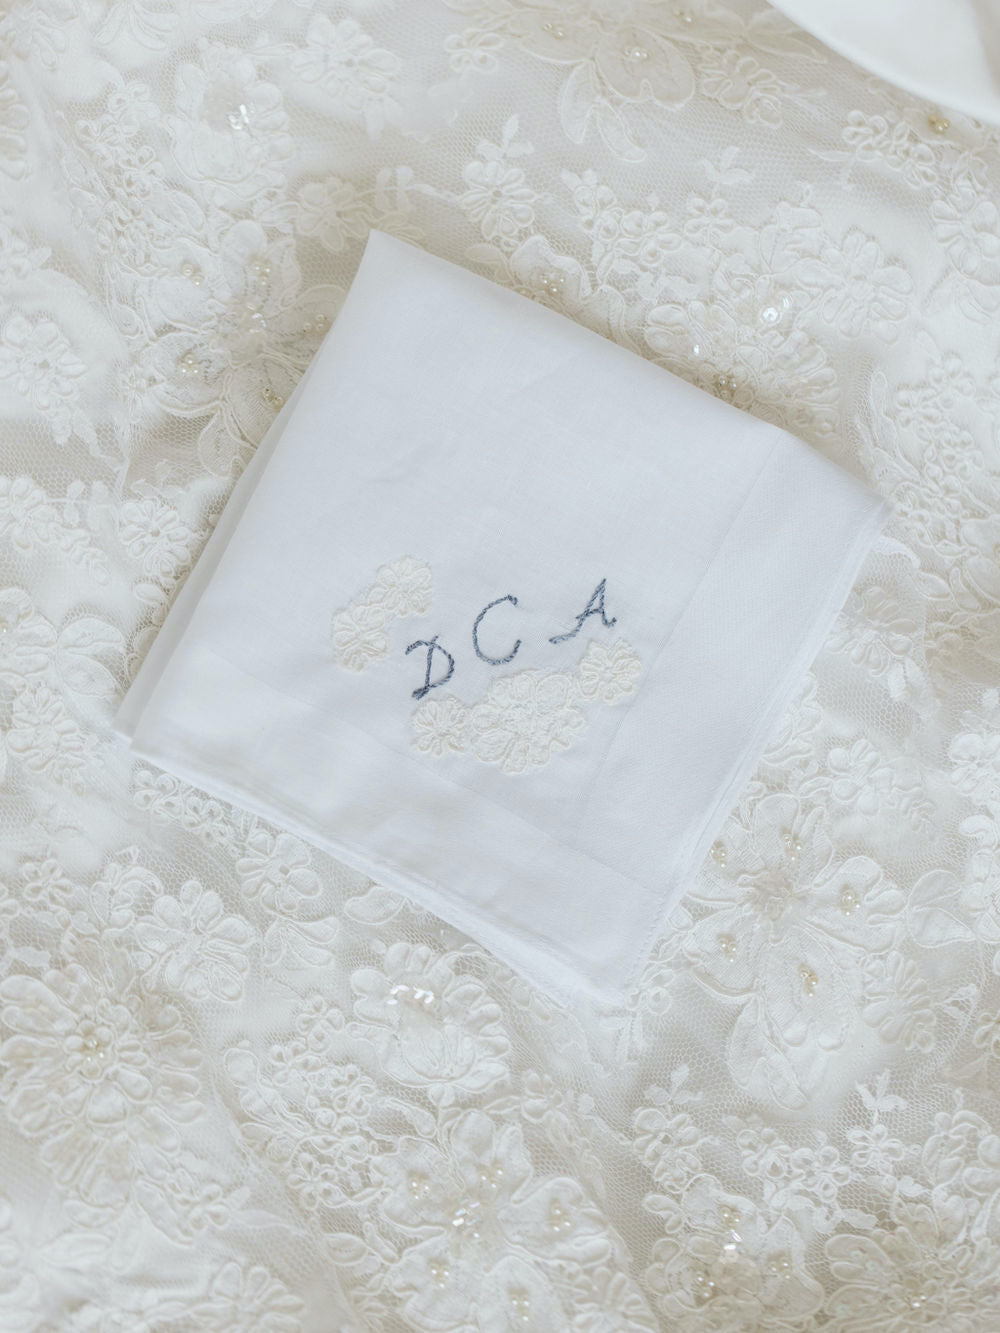 wedding handkerchief made from mother's wedding dress with embroidered monogram by expert heirloom designer The Garter Girl